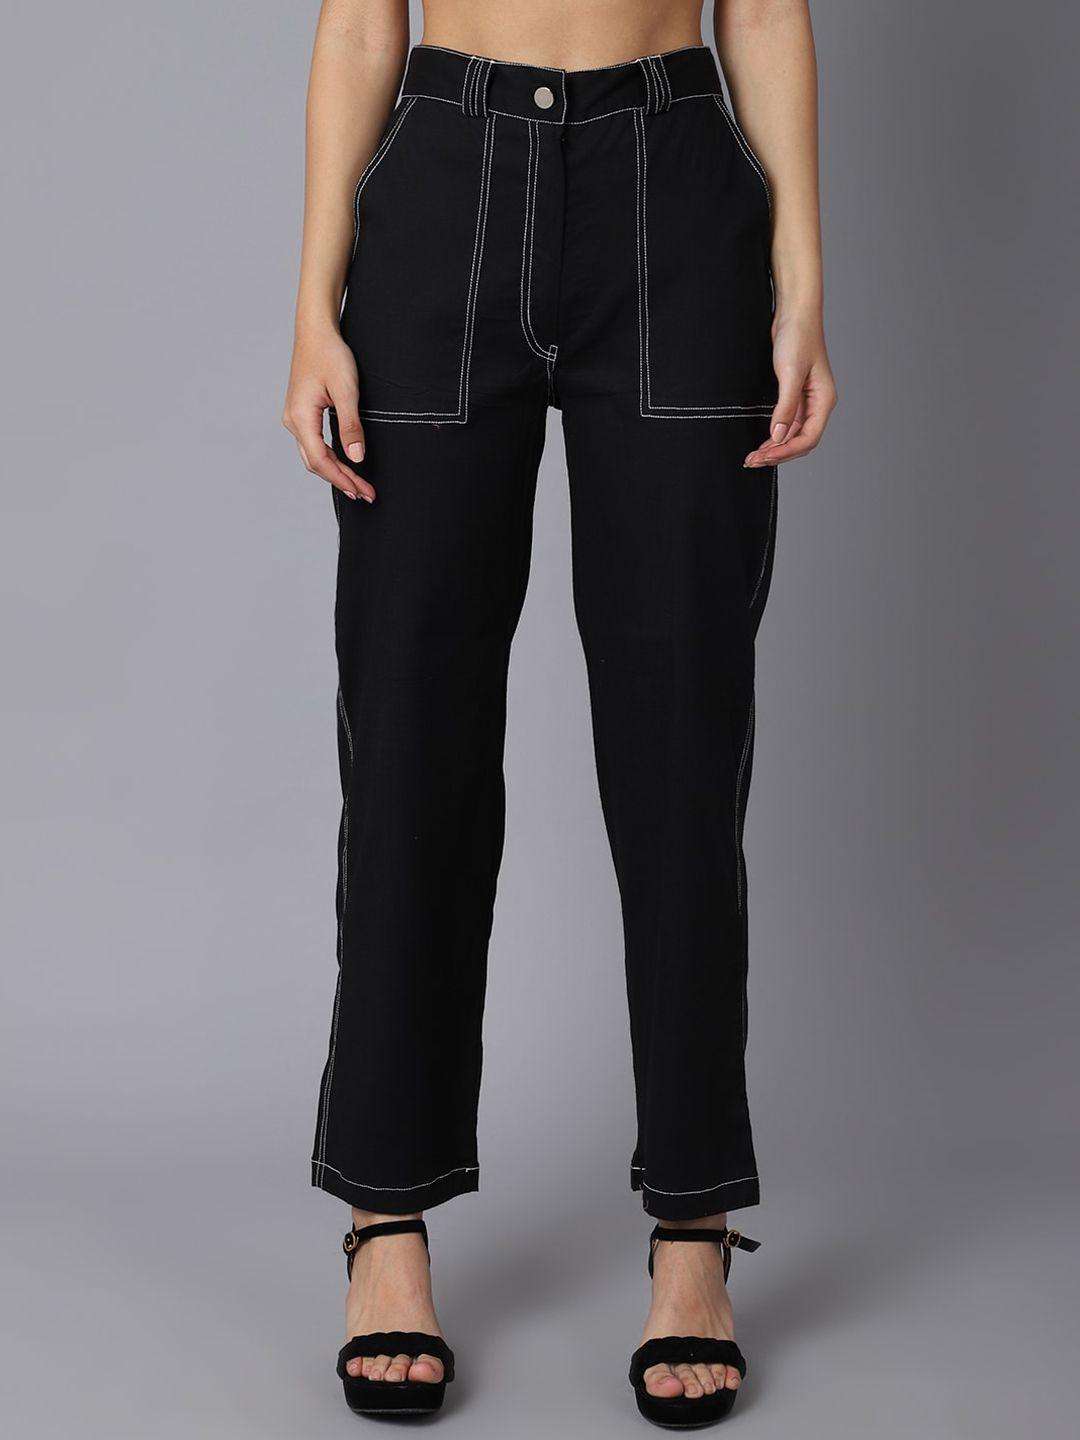 tag 7 women black smart straight fit trousers